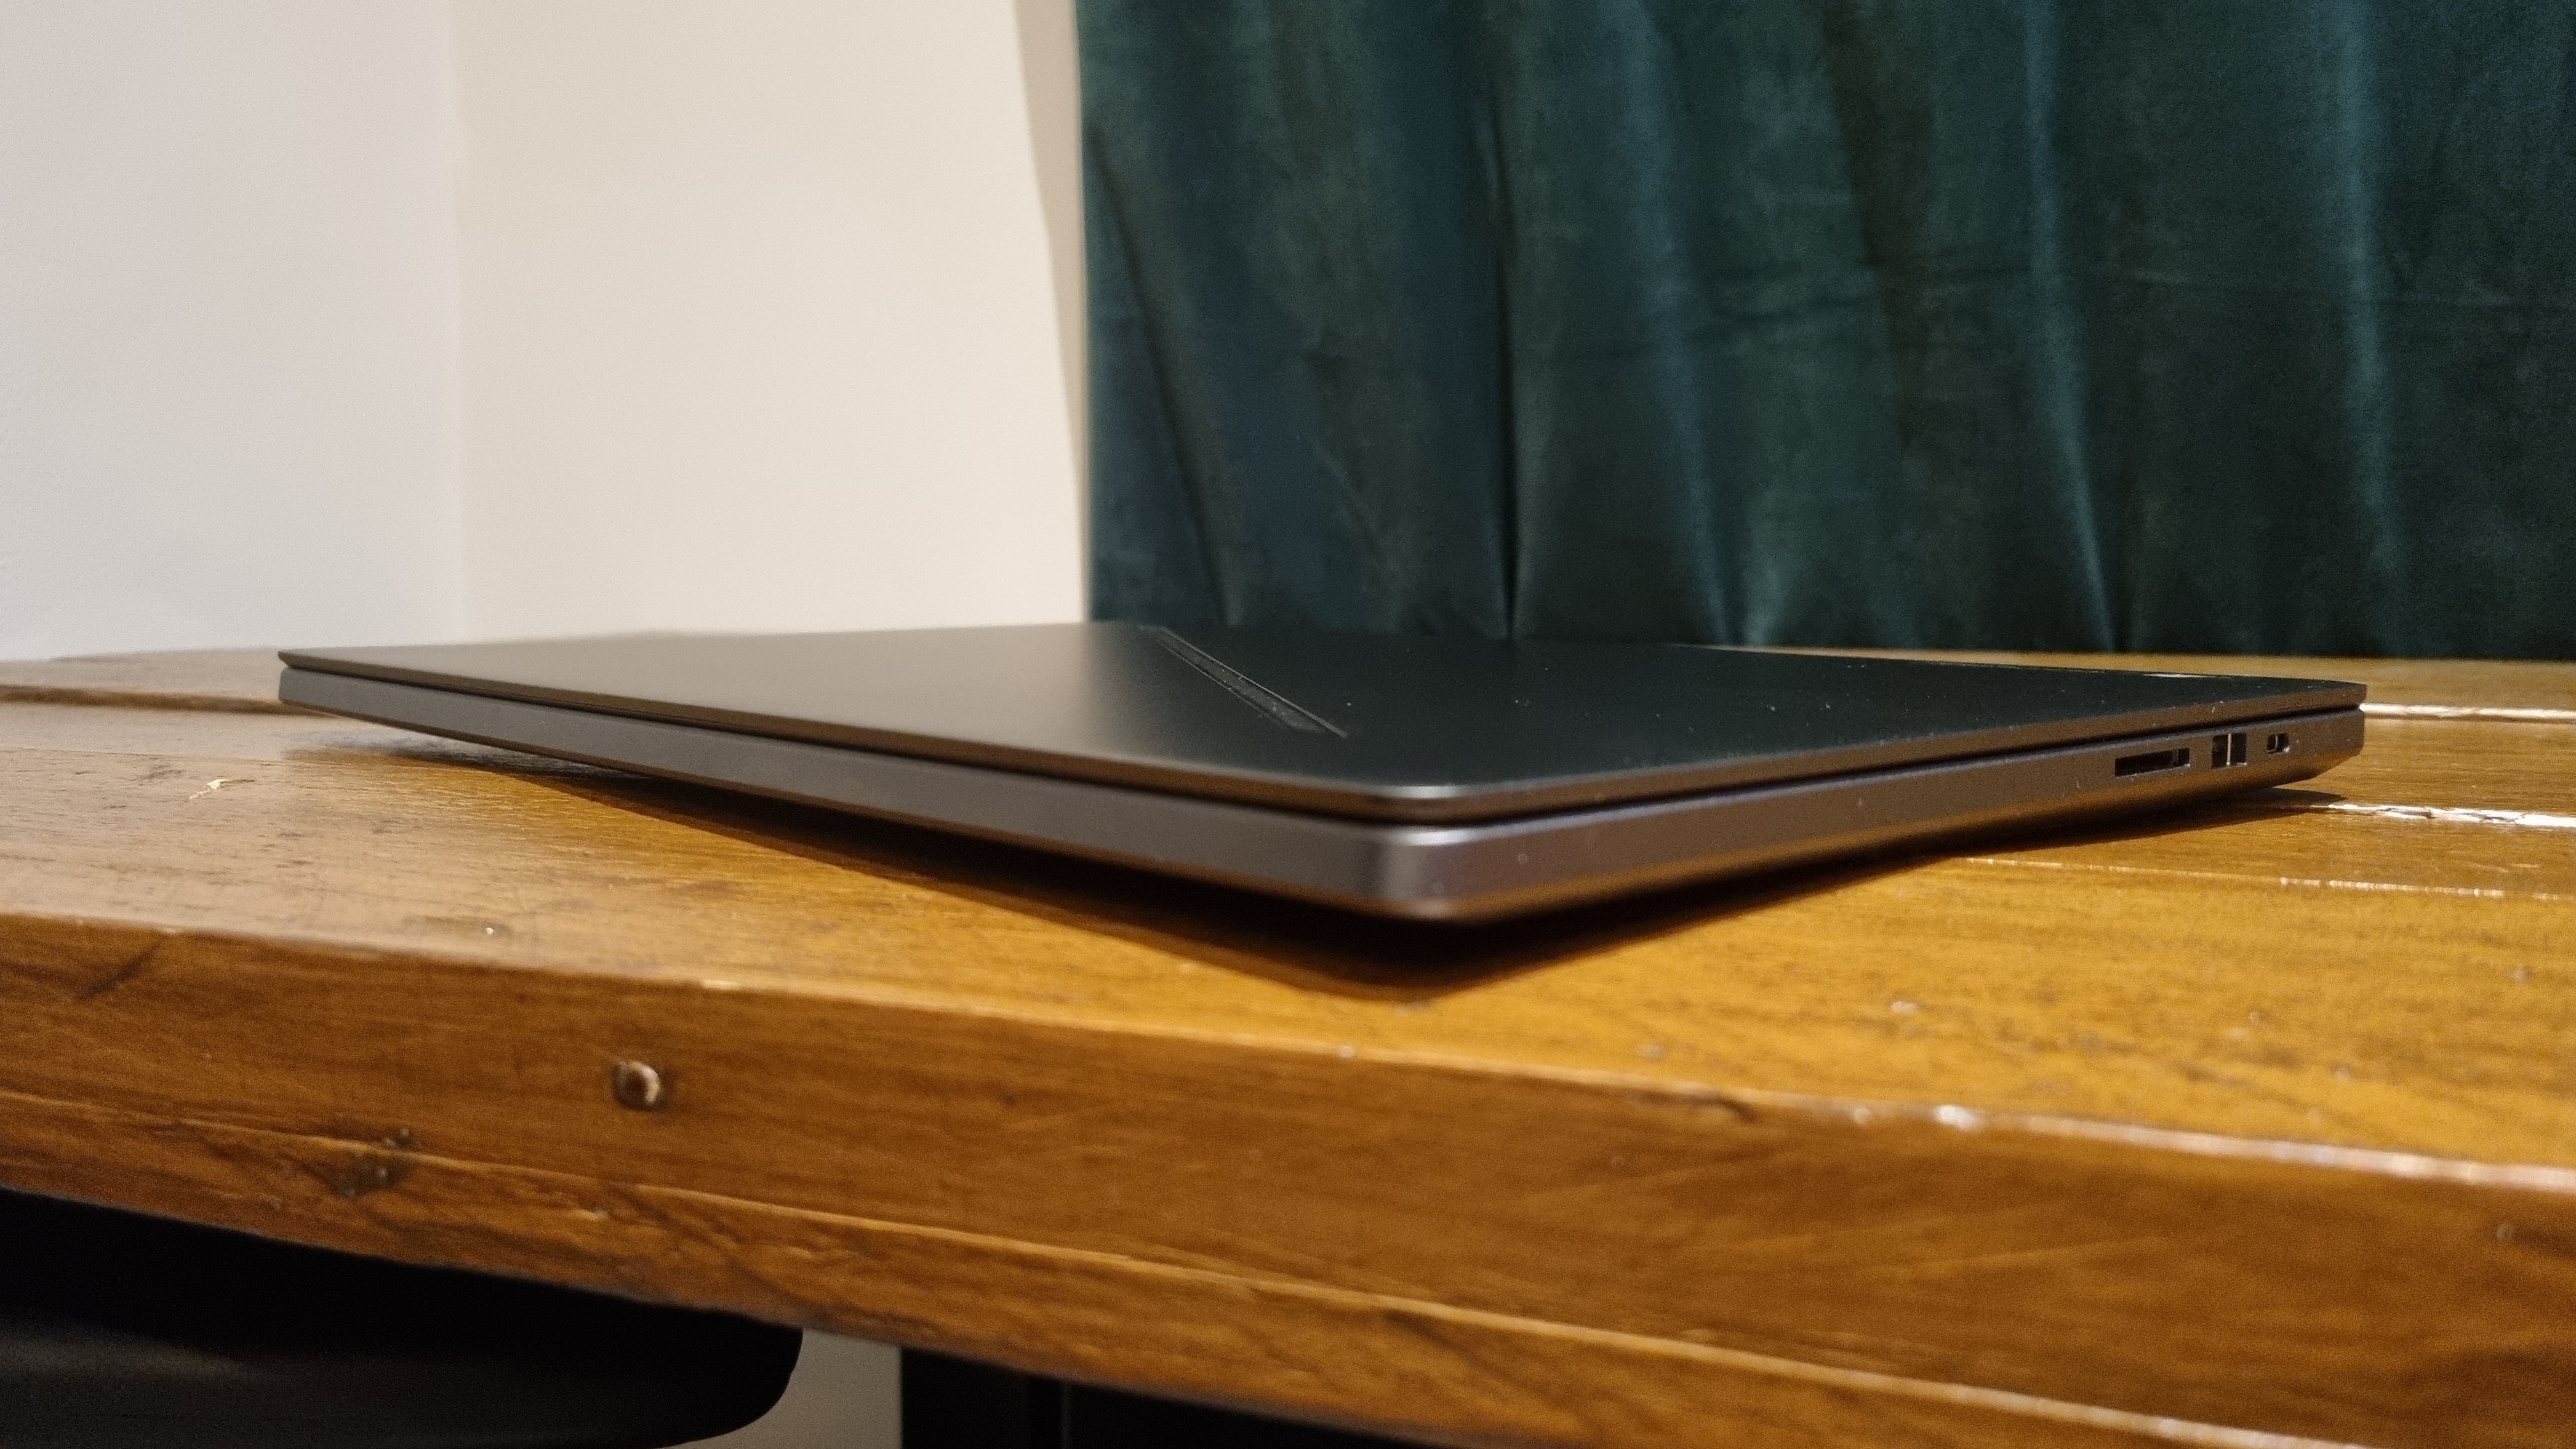 The Asus ROG Zephyrus G16 closed on a desk